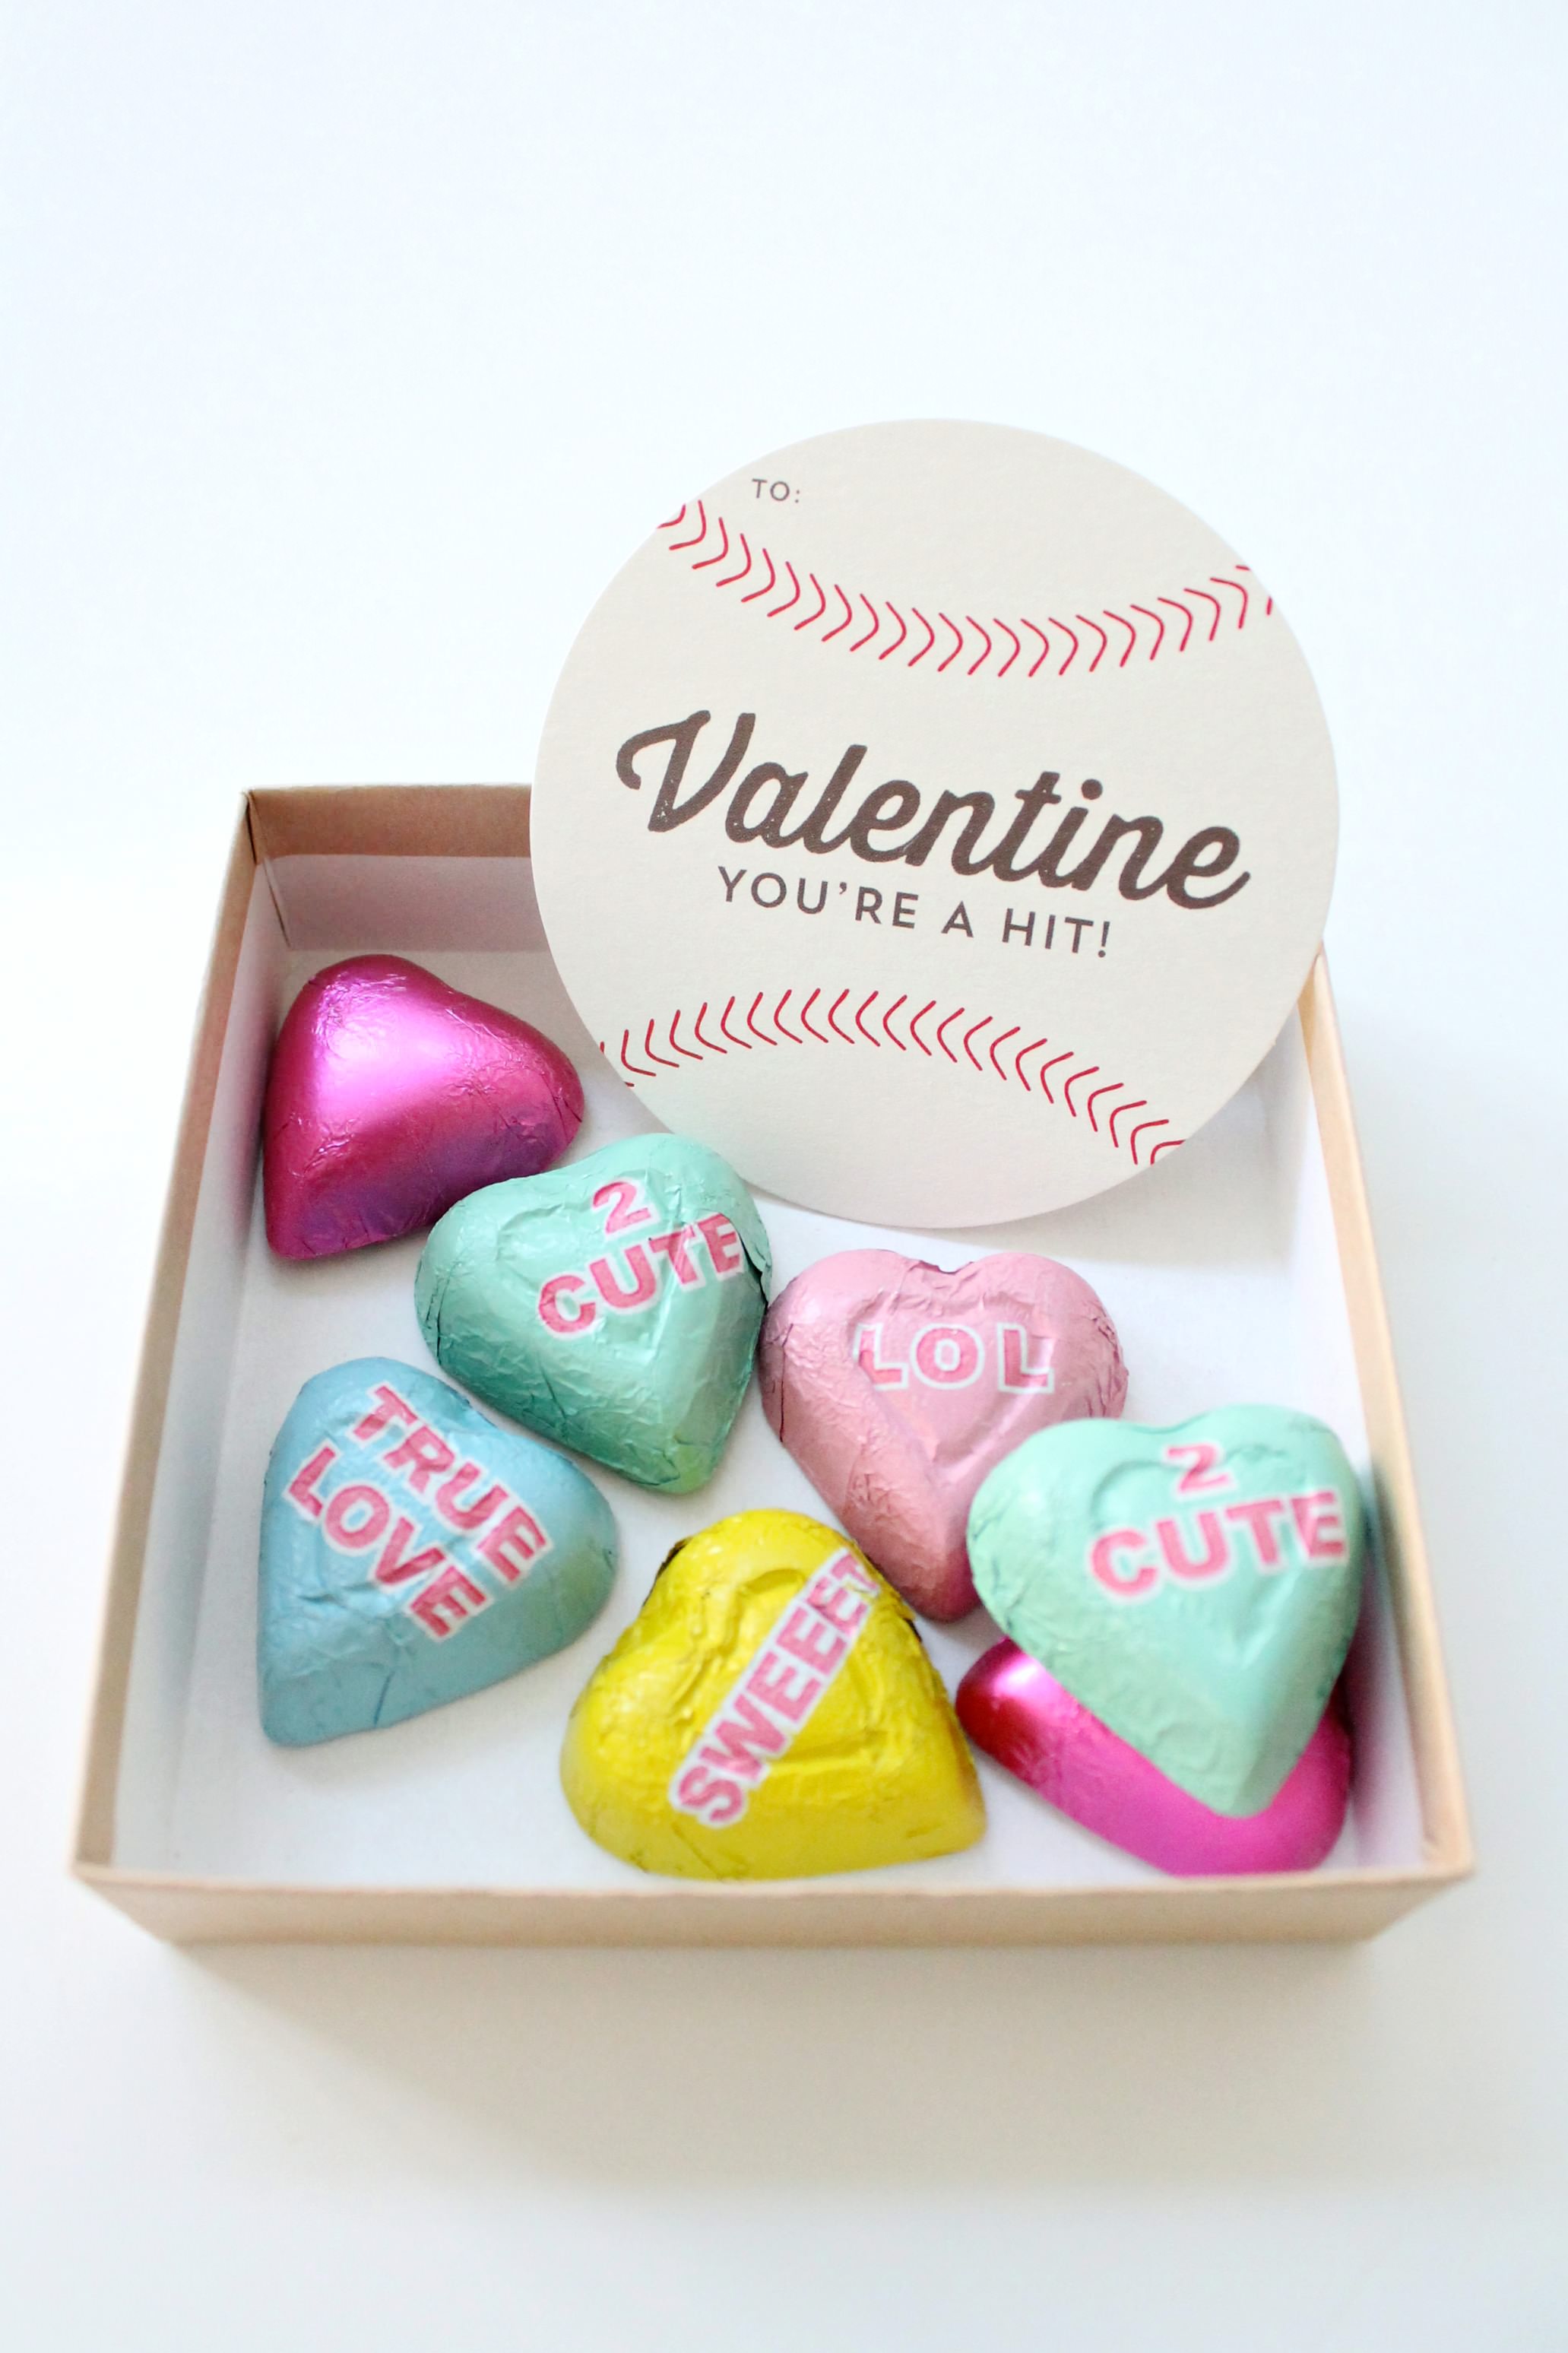 Minted-Valentine's-day-2015-gift-styled-andphotographed-by-Geraldine-Little-Big-Bell